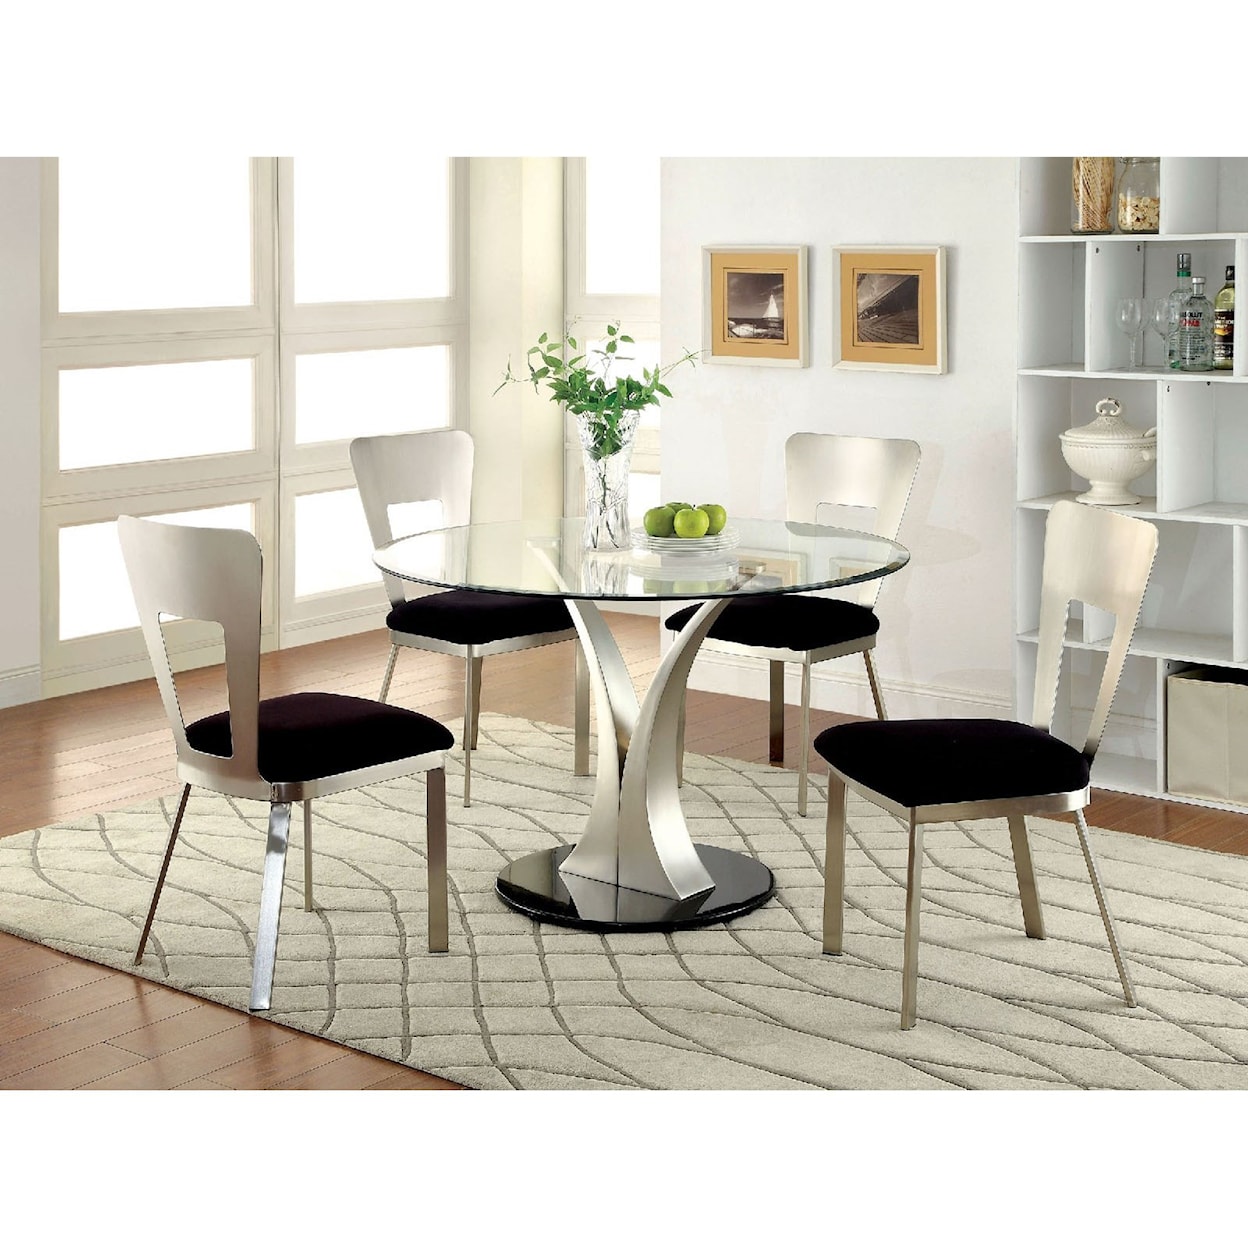 Furniture of America Valo Round Dining Table